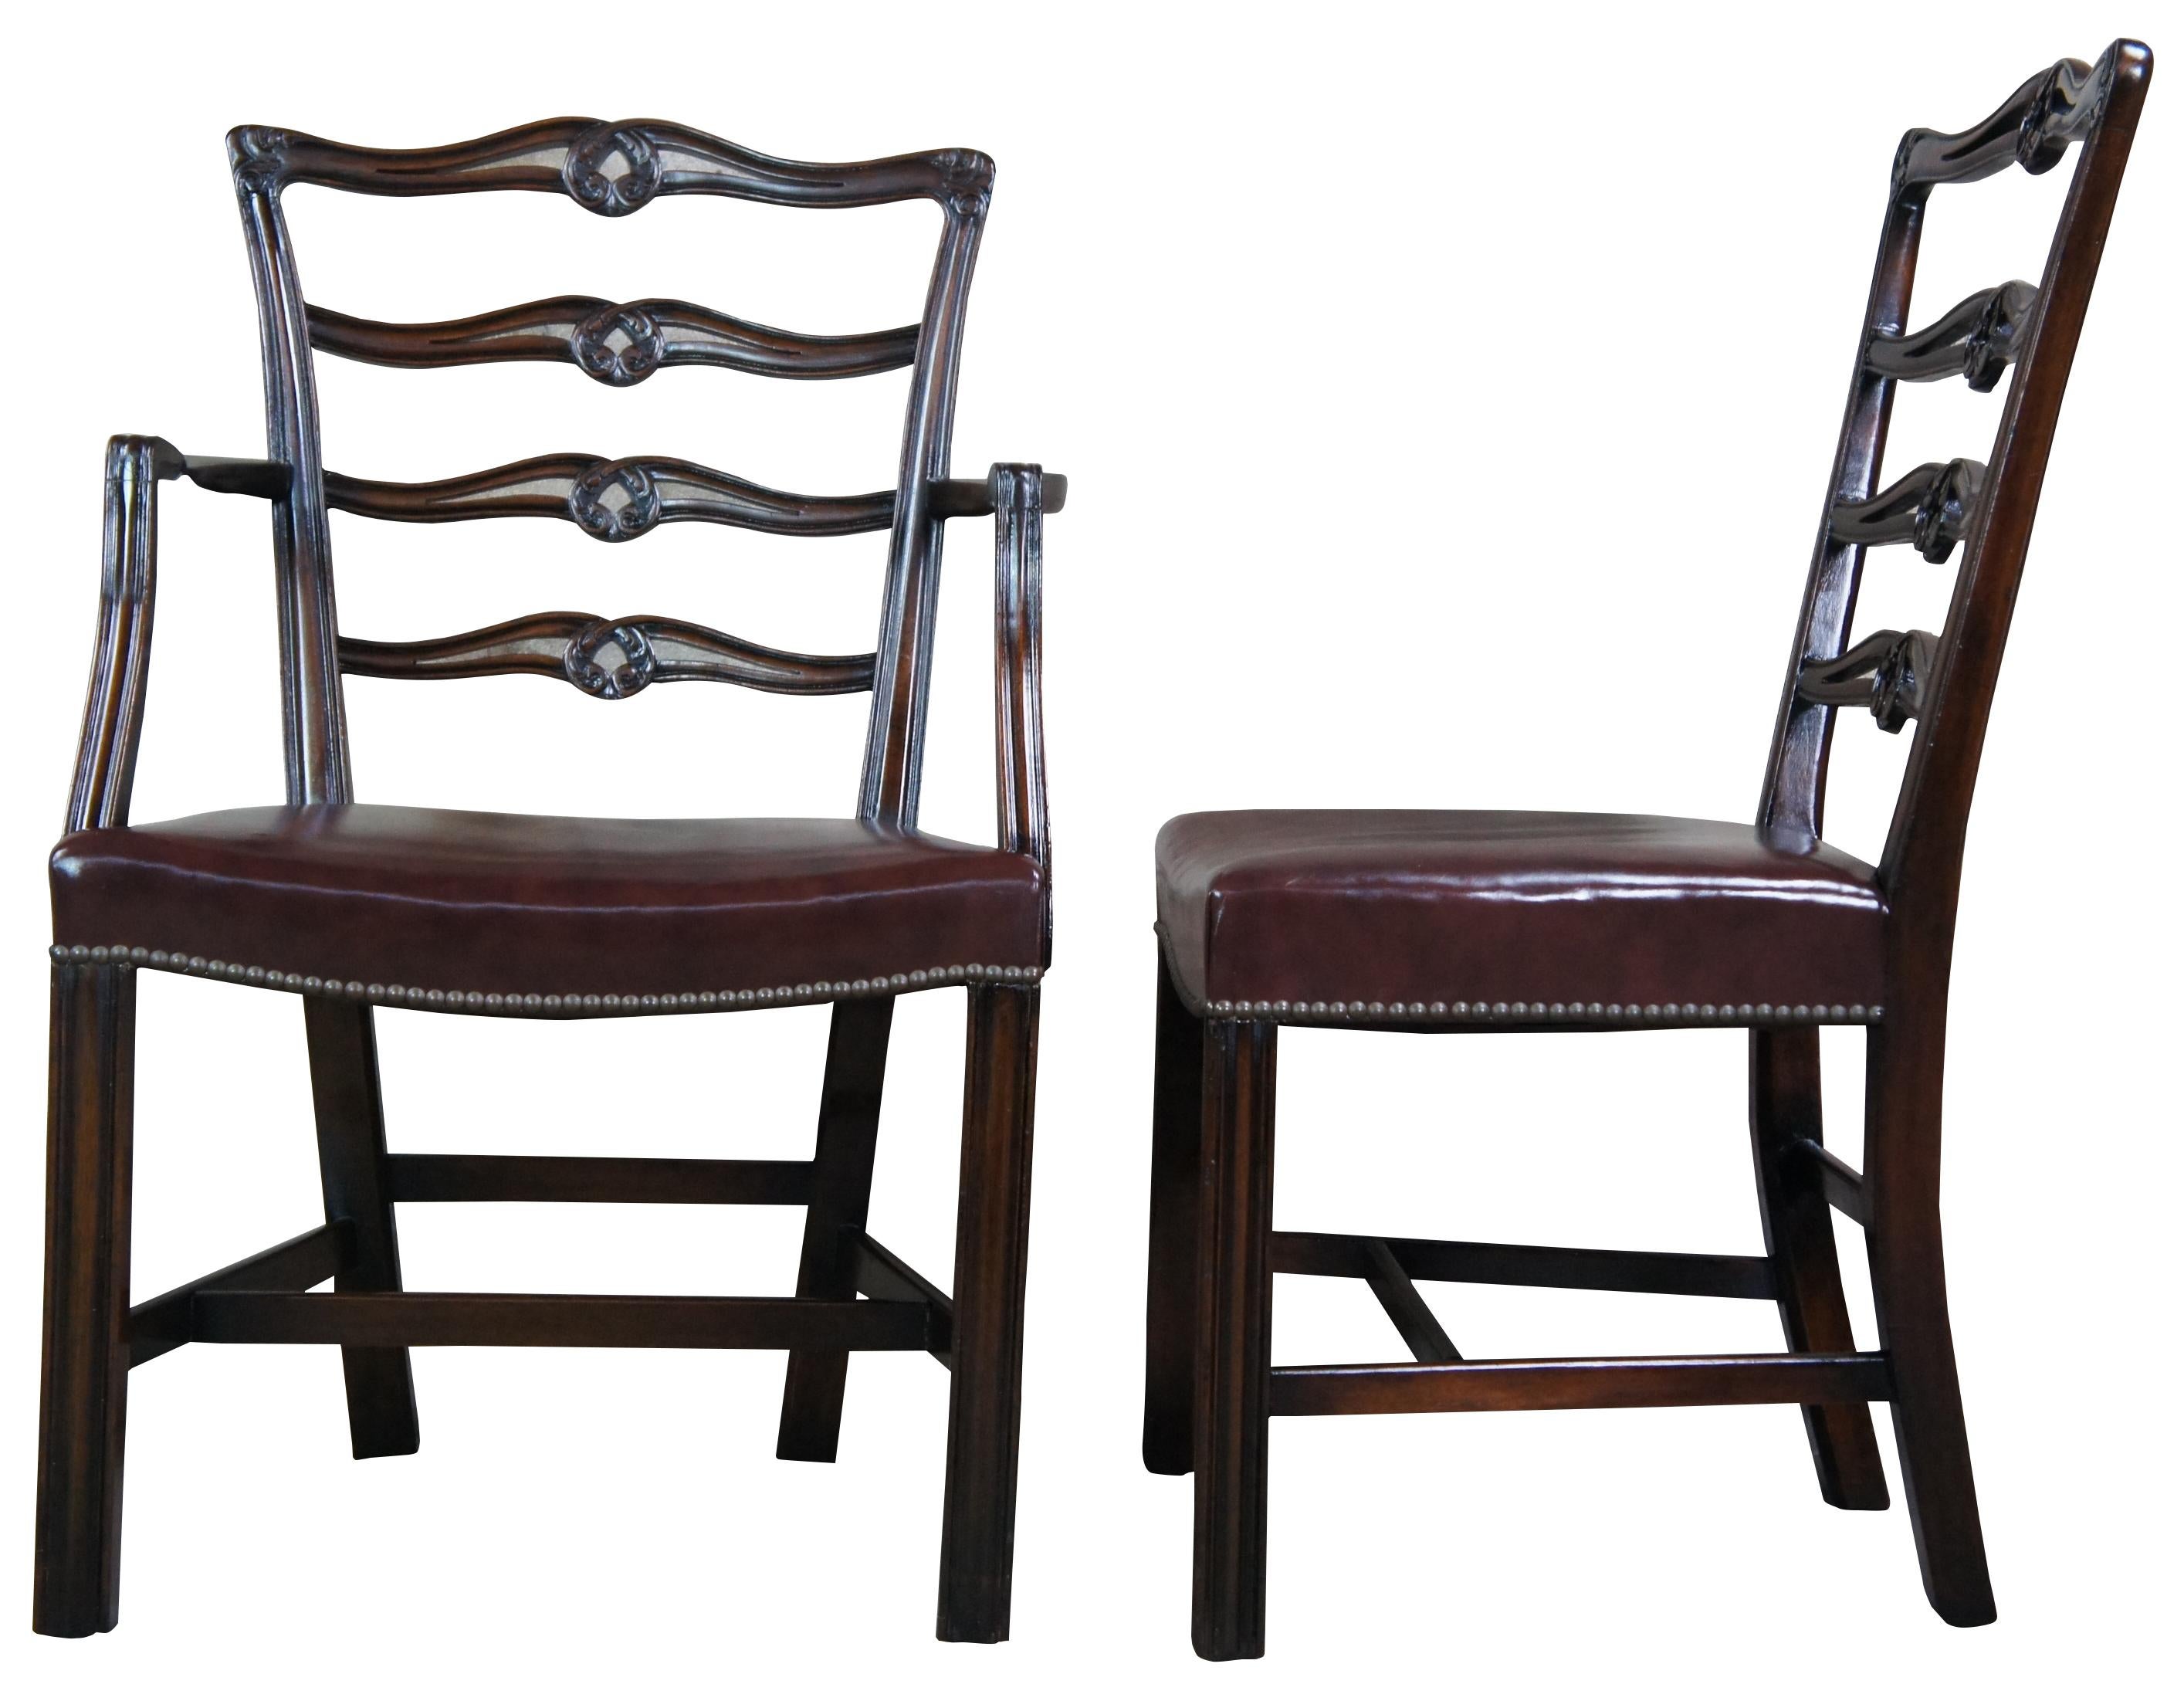 Six antique dining chairs made from mahogany featuring Georgian / Chippendale style, circa first quarter 20th century. Includes a 